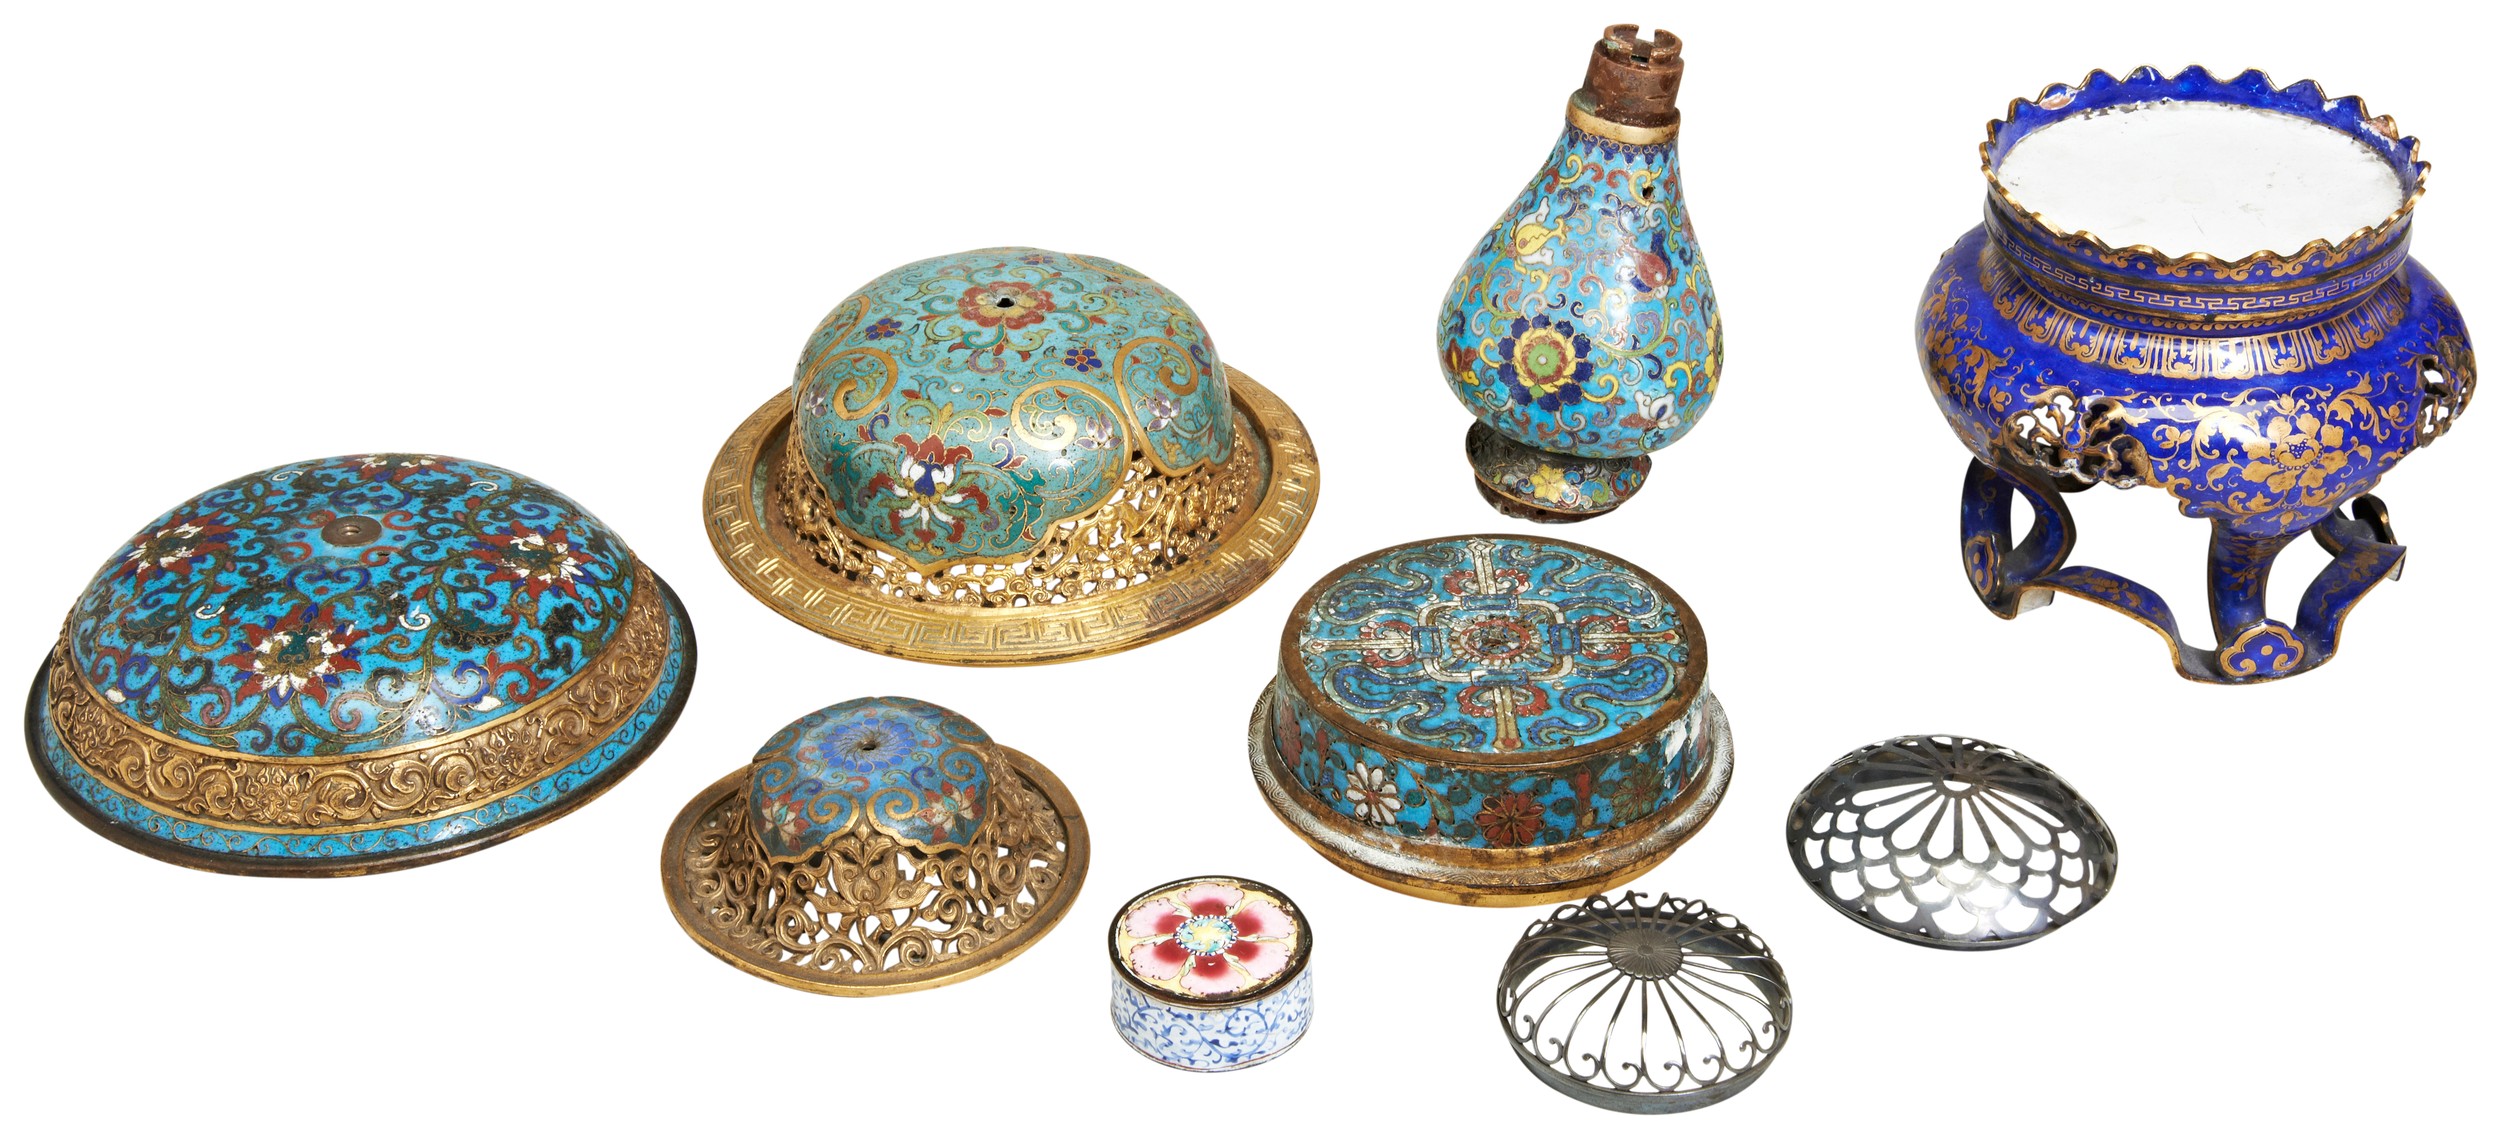 A COLLECTION OF CLOISONNE, ENAMELLED AND METAL COVERS  18TH CENTURY Three cloisonne covers with